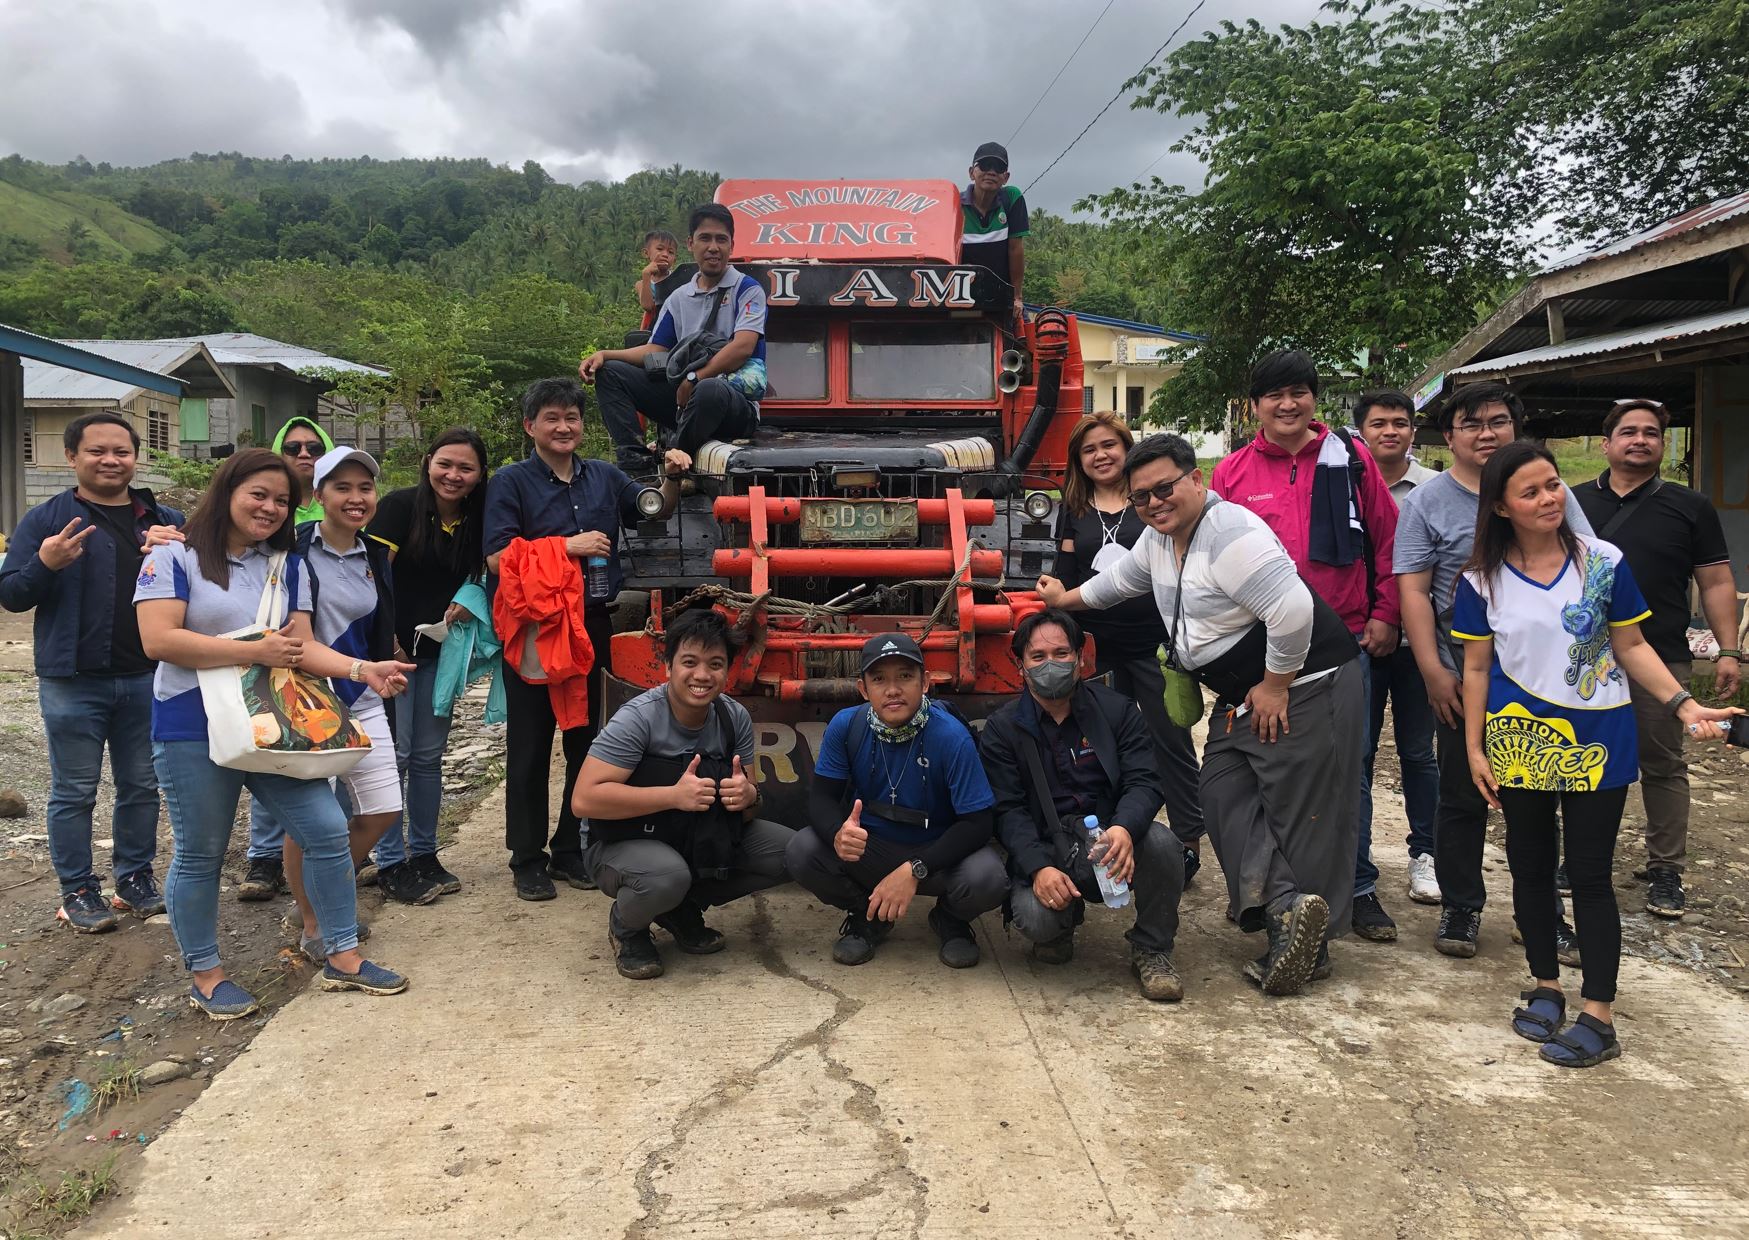 Photo: Inchul and the Mindanao solar home system mission in front of off-road truck which help him and the team make it through muddy road and stream.